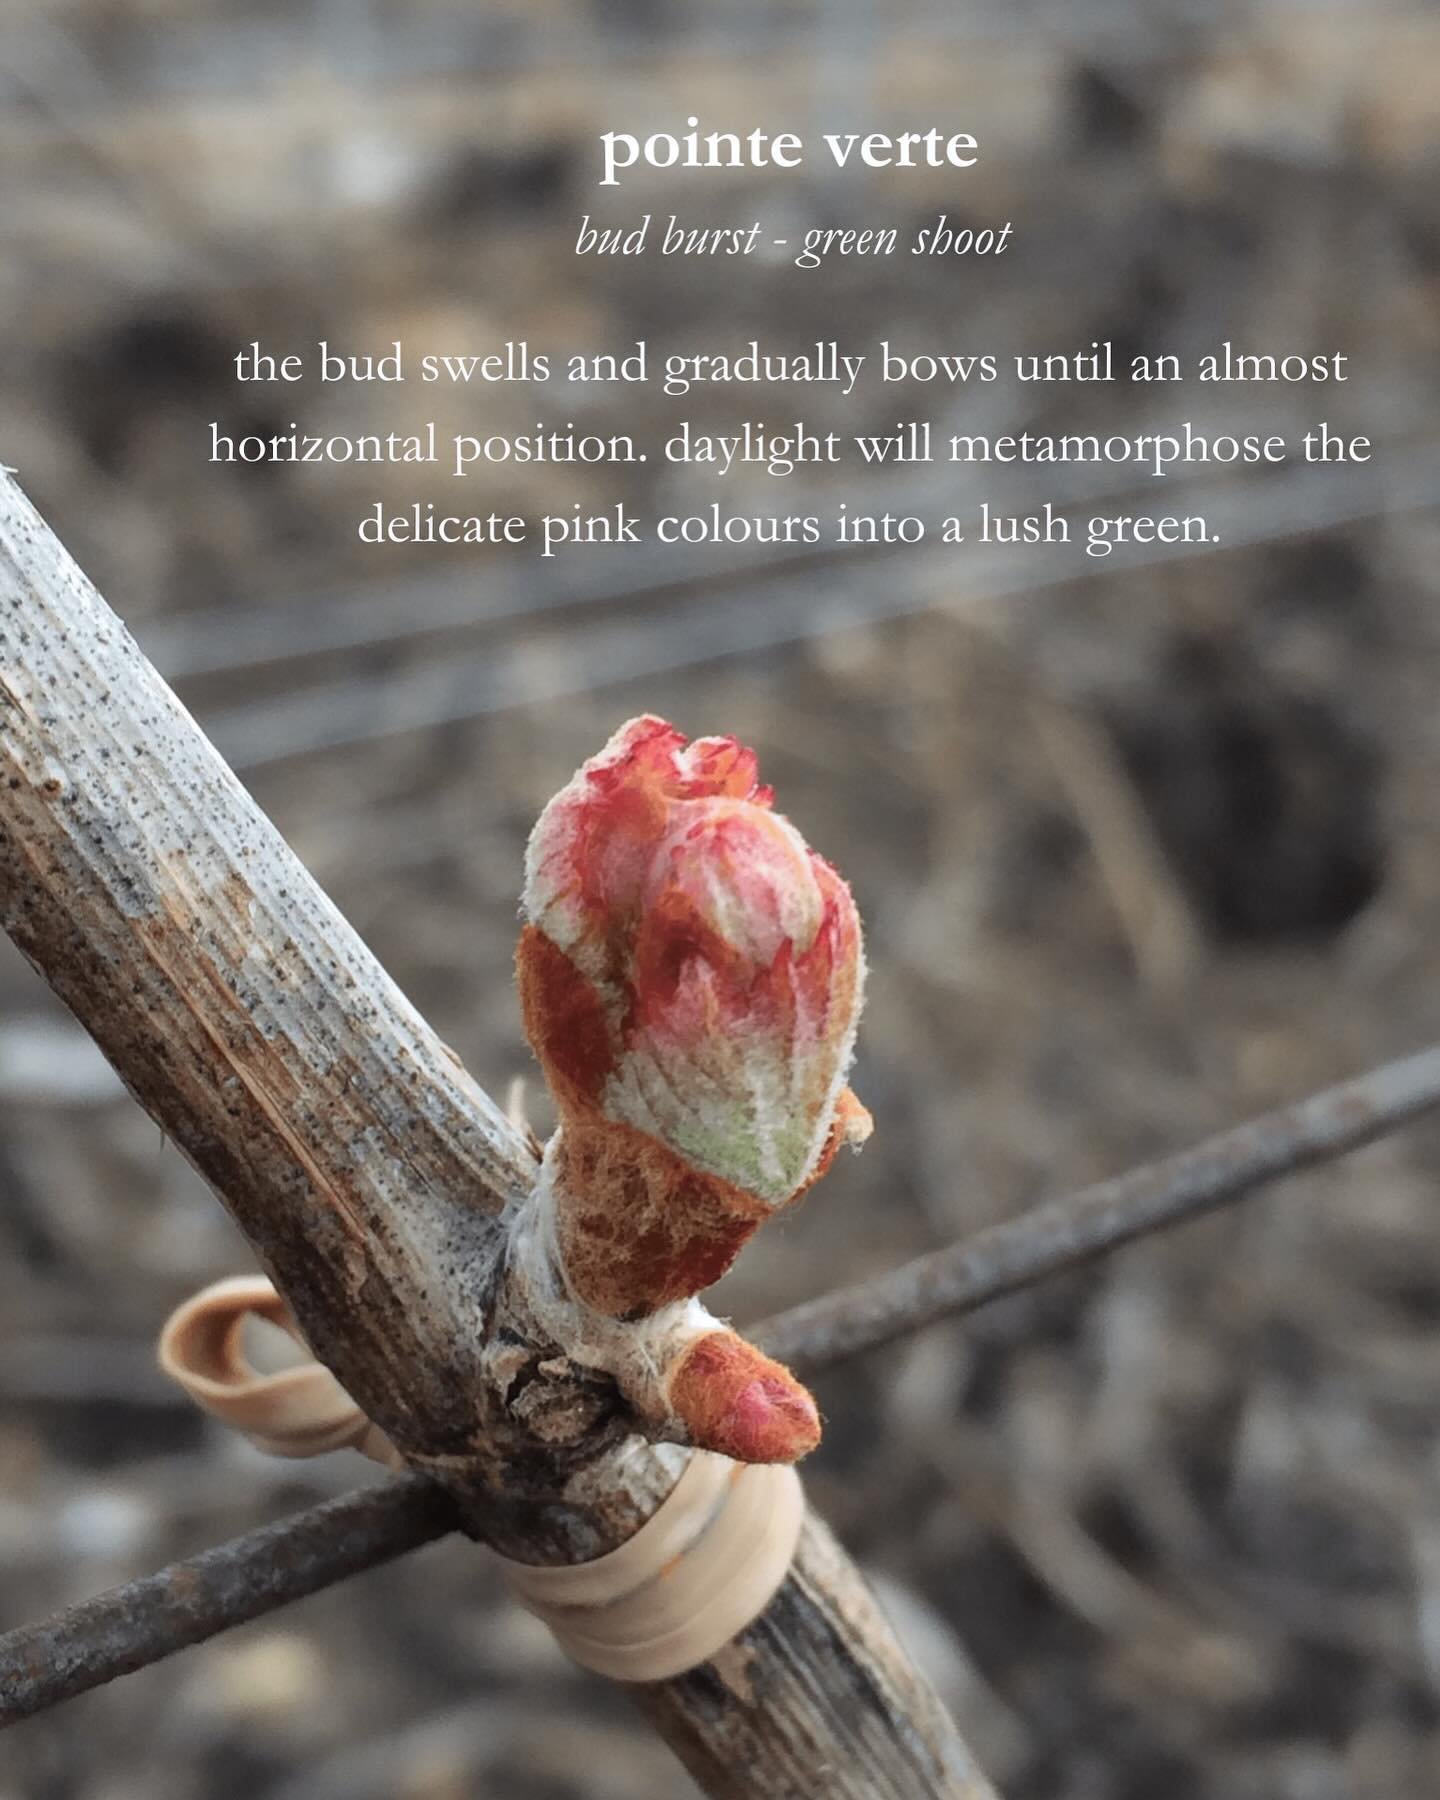 No worries, we&rsquo;re not there yet in our Champagne vineyards. Just wanted to share and show you why we are a bit obsessed with all these pink colours at this time where spring unfolds around us so tender and beautiful. Next week we bring the new 